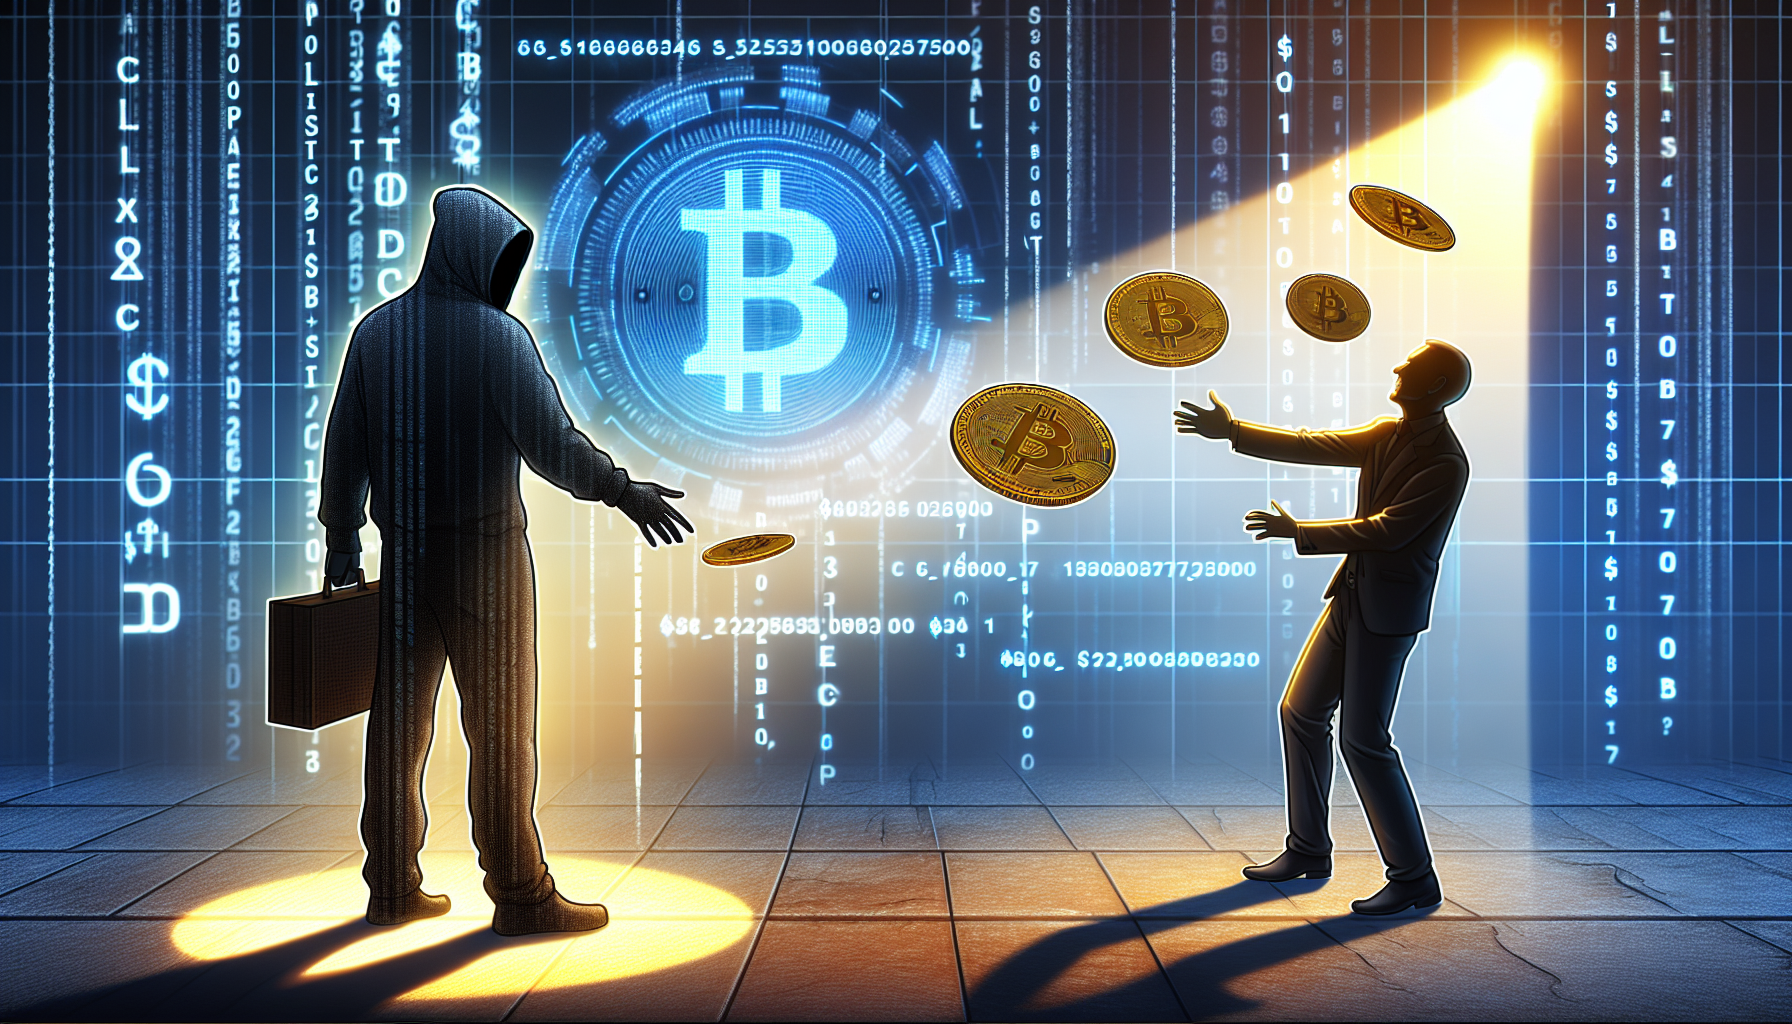 Crypto Scammer Returns Over $150,000 to Victim, Read the Full Story Here